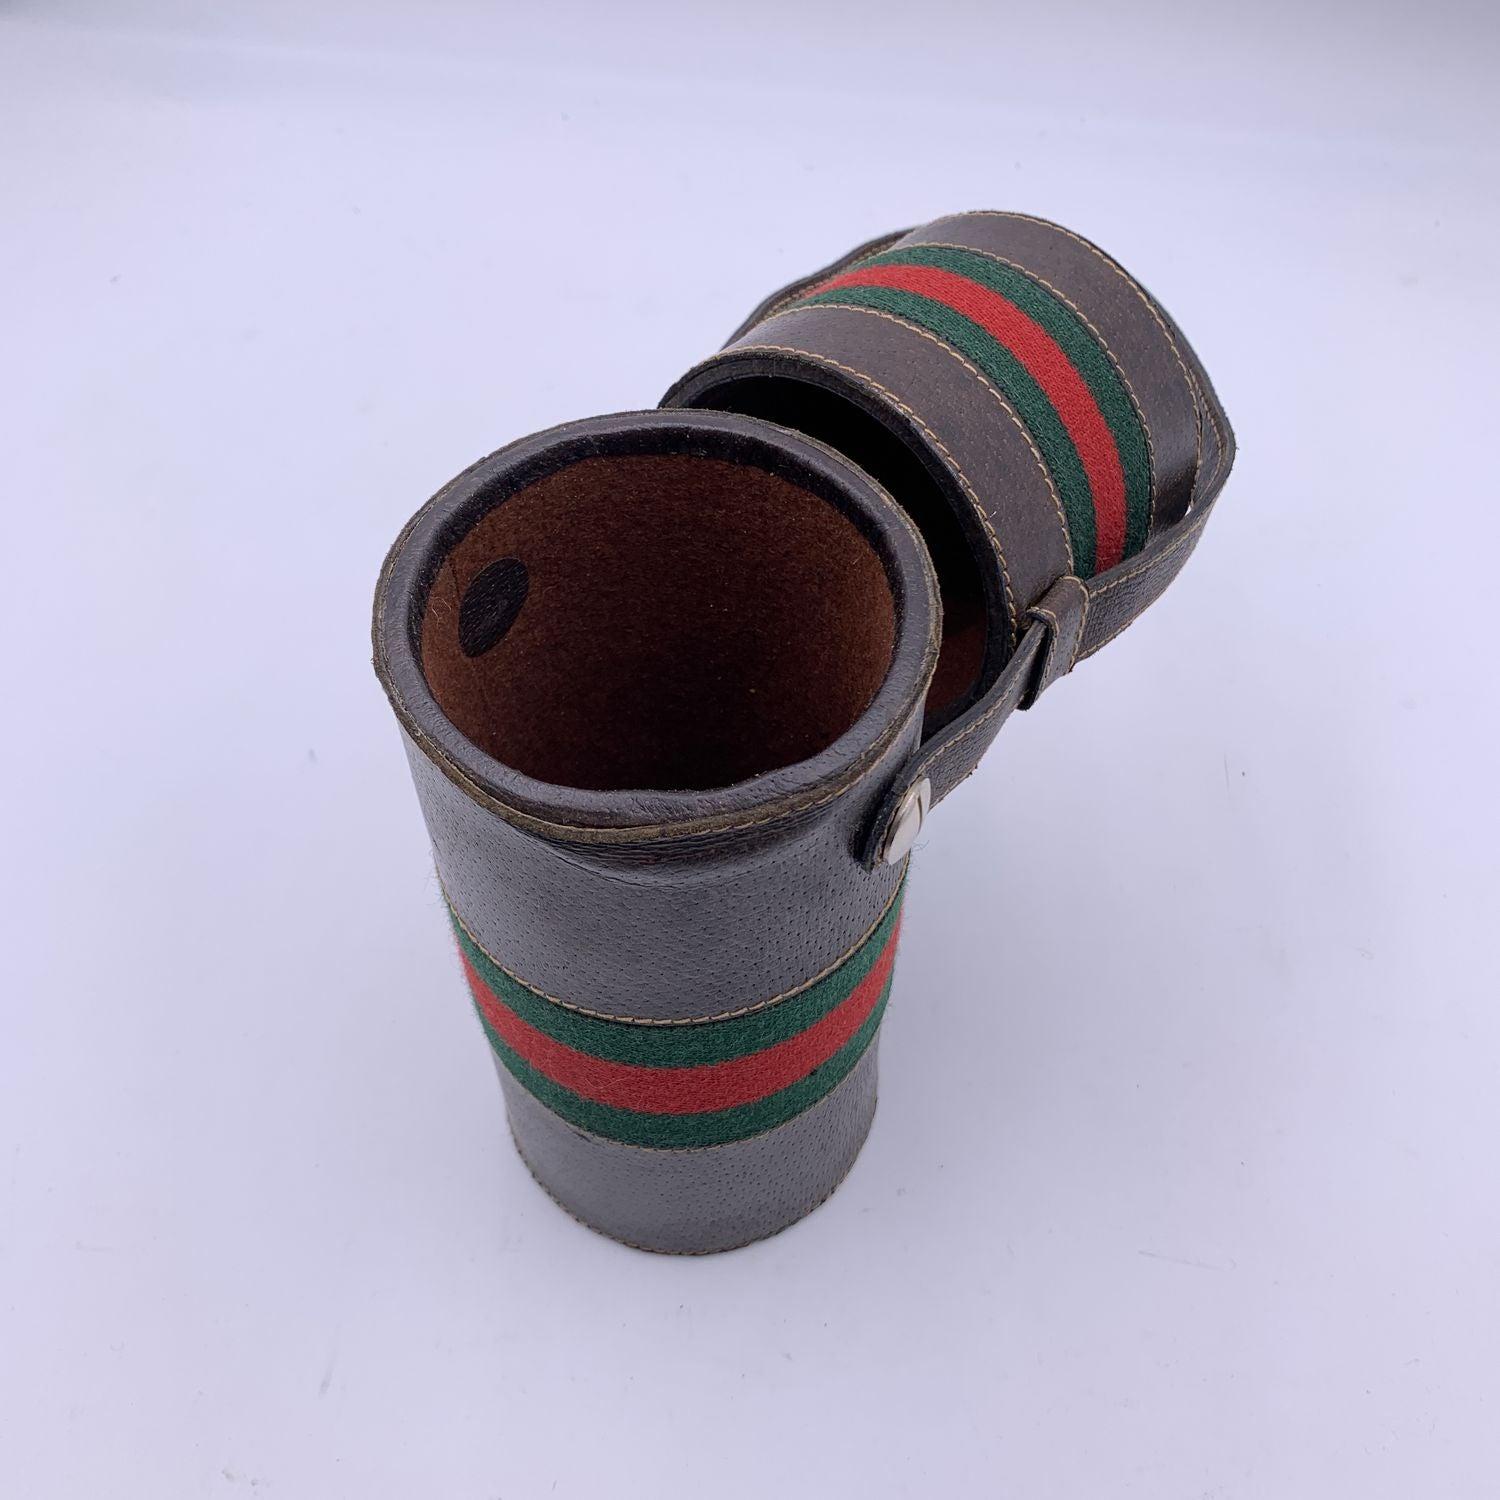 Vintage Vacuum flask/Thermos holder by GUCCI . Brown leather Thermos Holder with green/red/green stripes around . The top of the holder slides up and down inside the strapping. Raise the top for insert a thermos bottle. Height: 10 inches - 25,4 cm